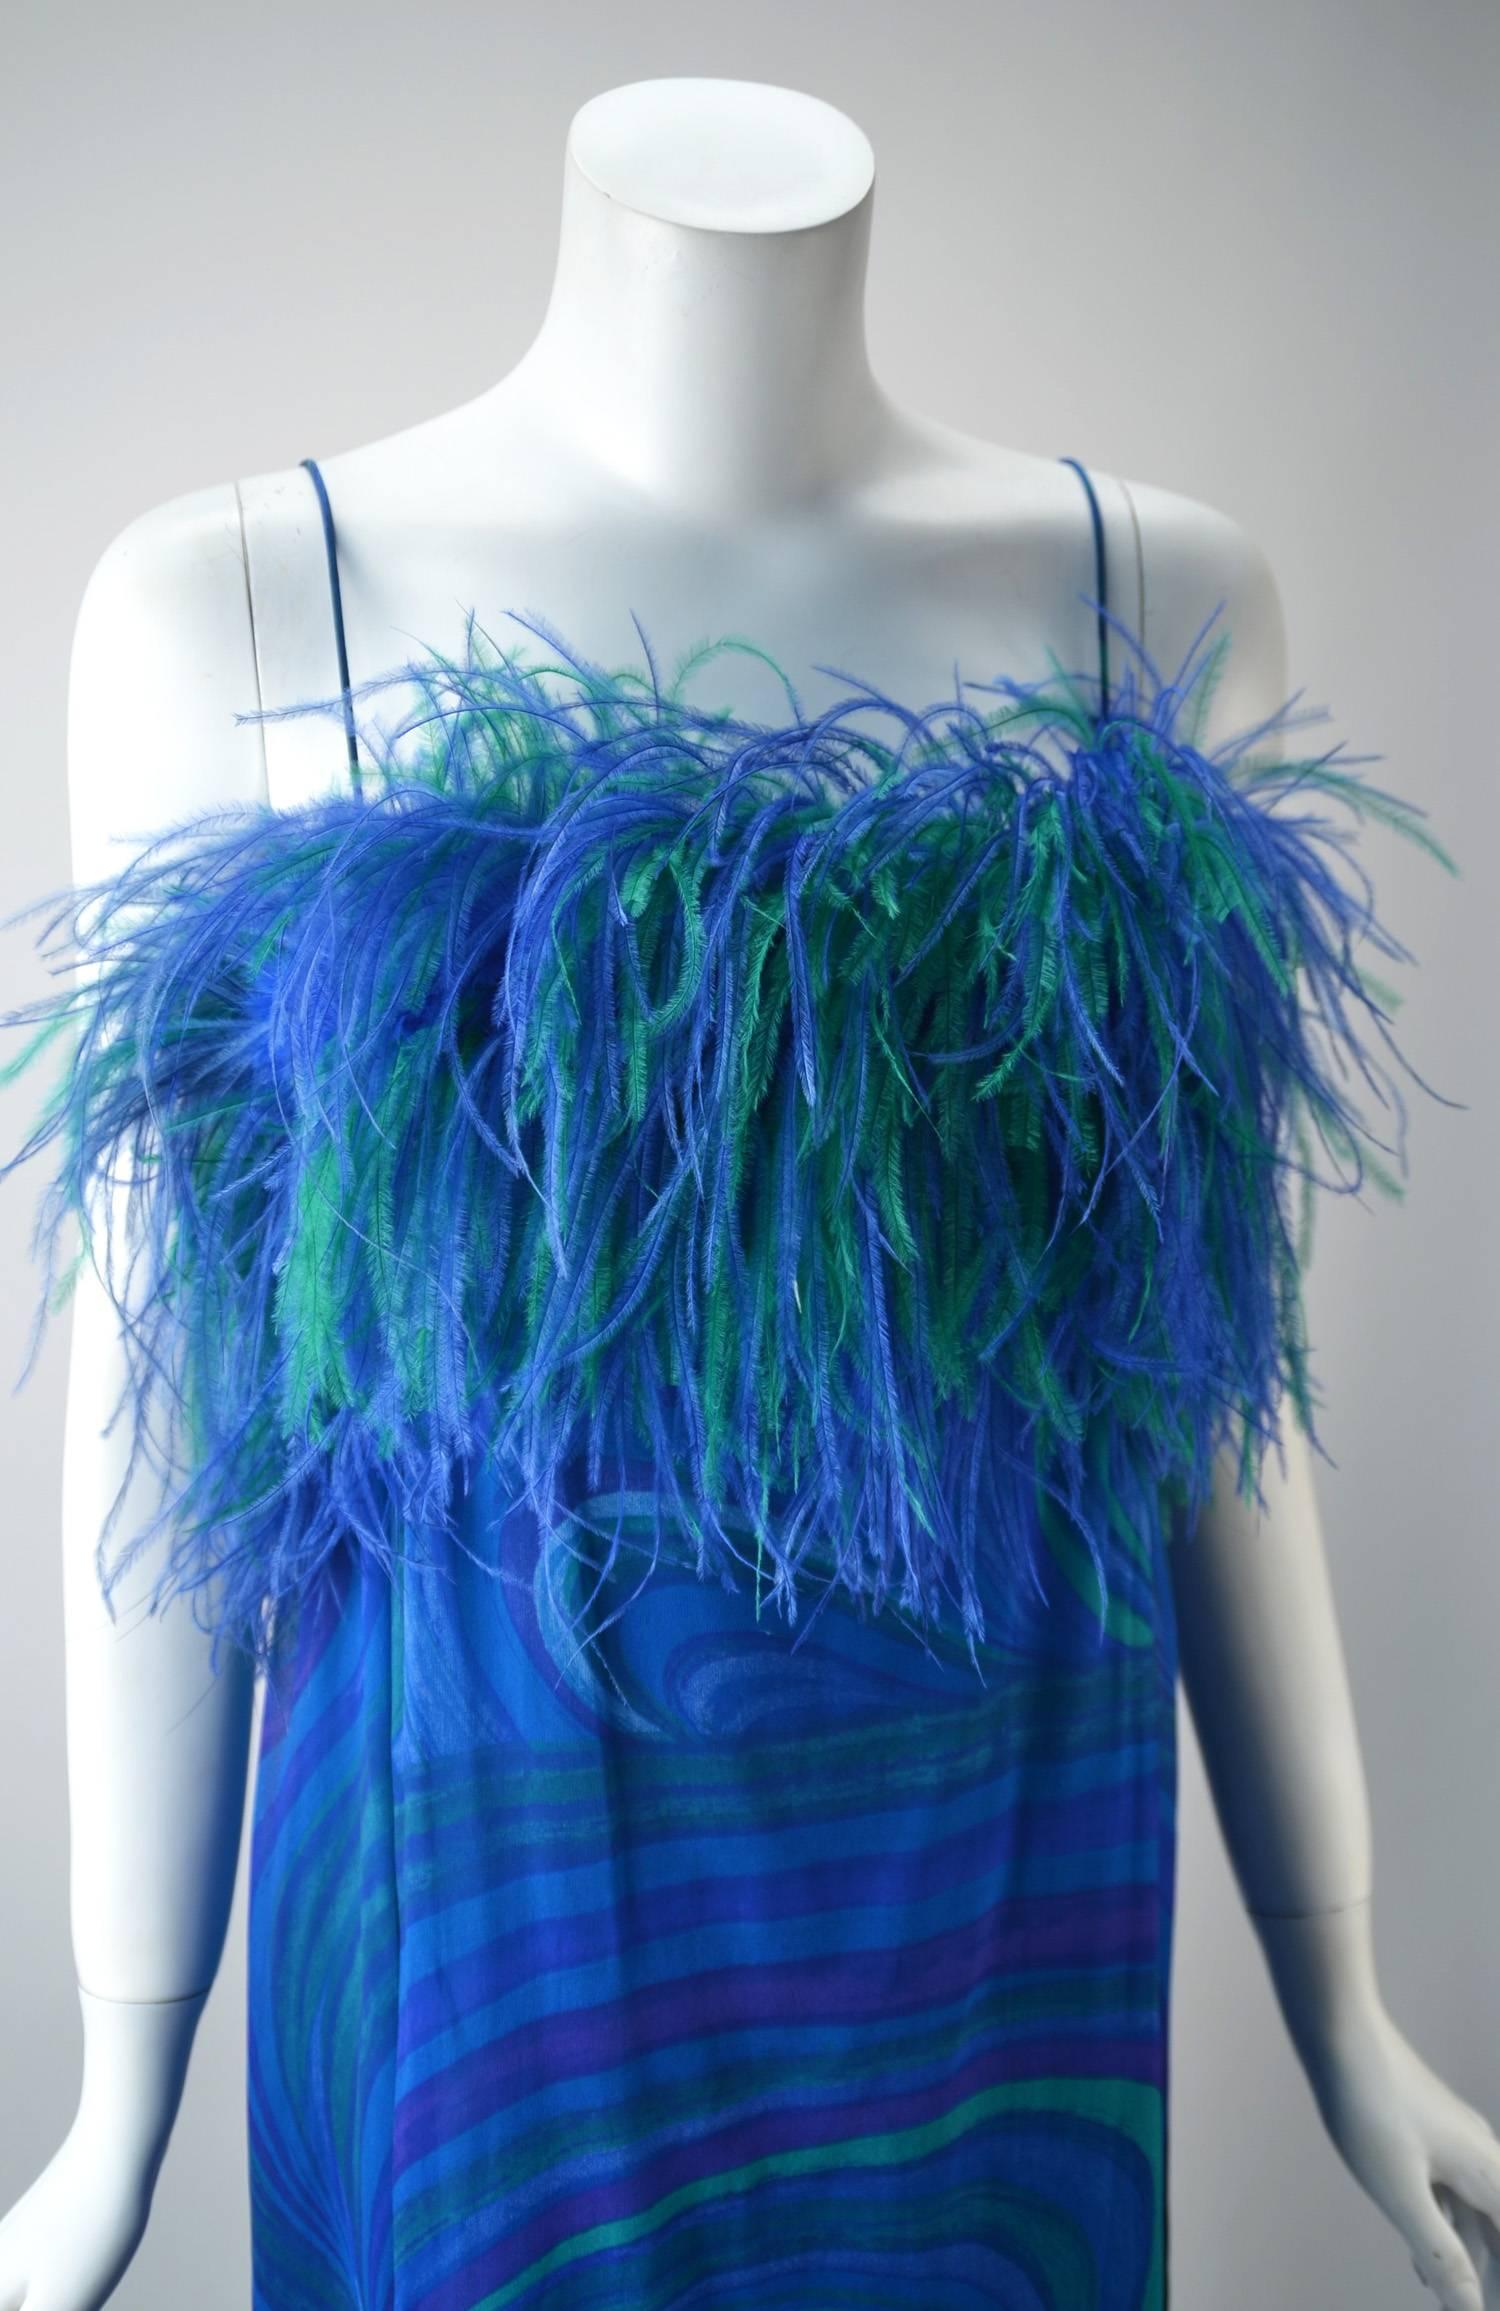 Women's 1960s Blue and Green Sheer Formal Dress with Ostrich Feathers